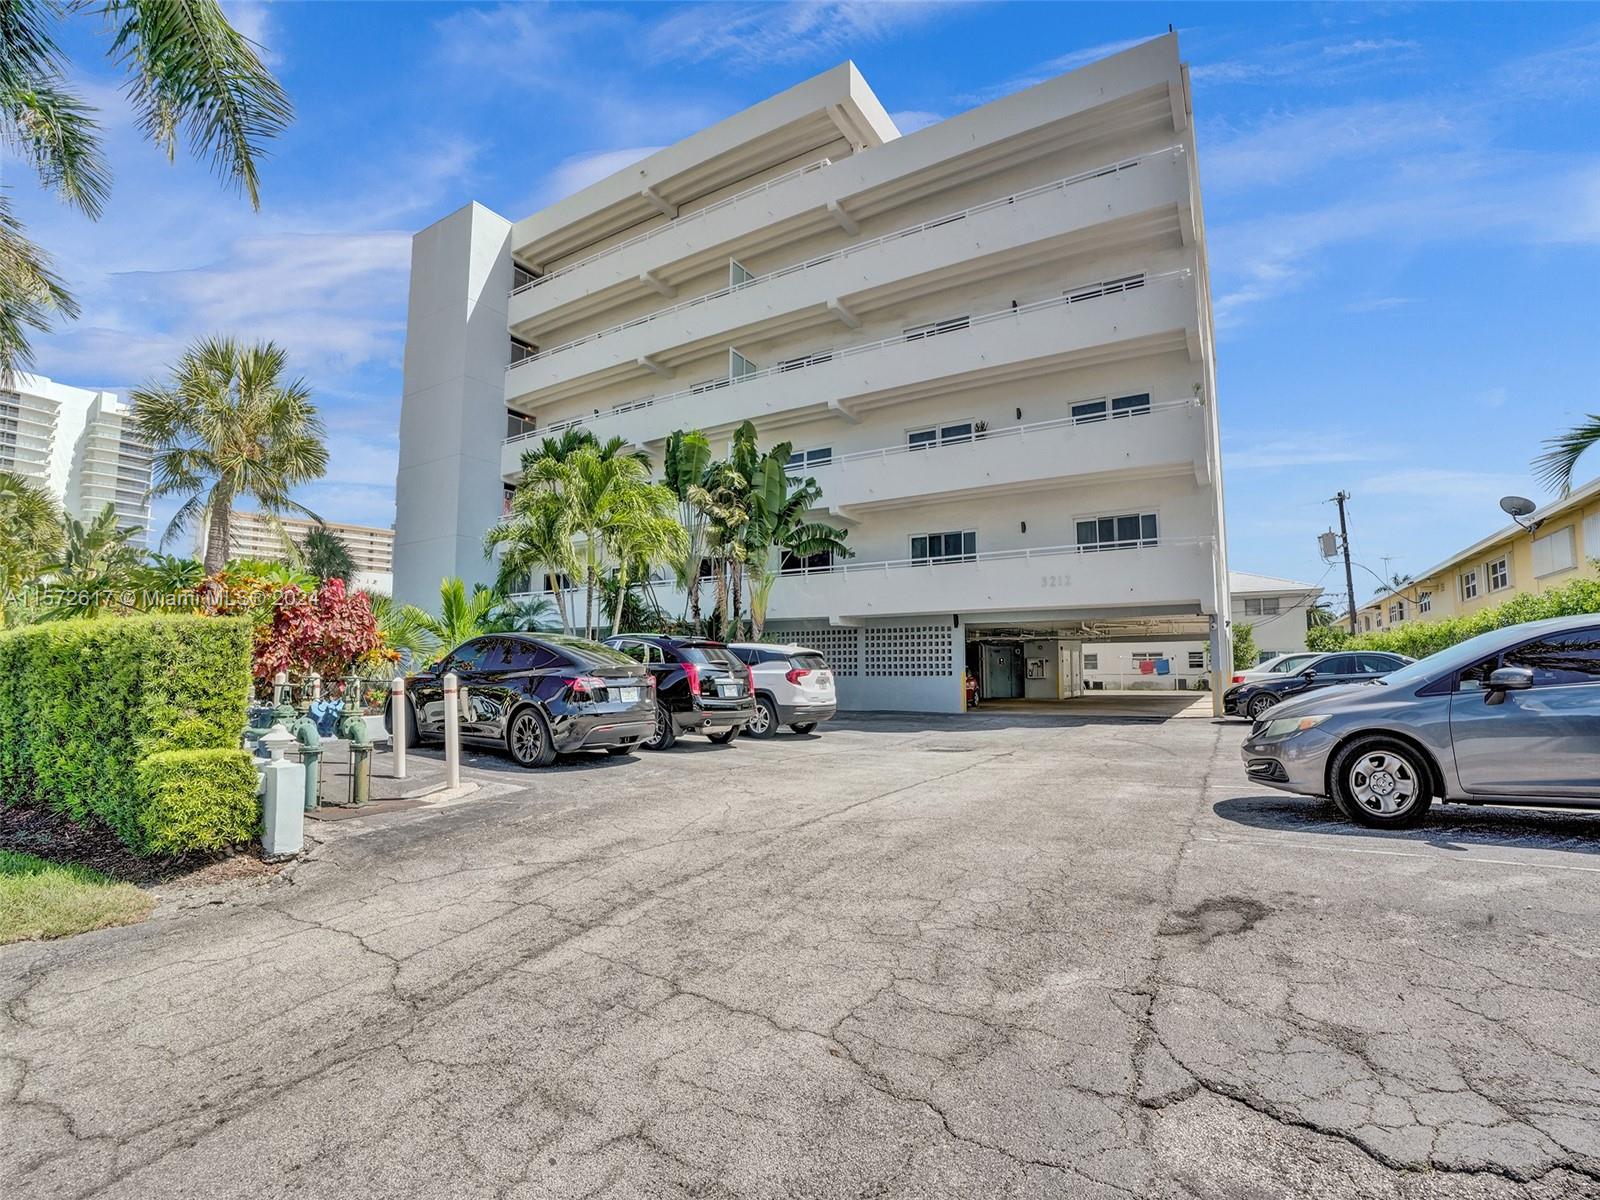 3212 NE 12th St 505, Pompano Beach, Florida 33062, 2 Bedrooms Bedrooms, ,2 BathroomsBathrooms,Residentiallease,For Rent,3212 NE 12th St 505,A11572617